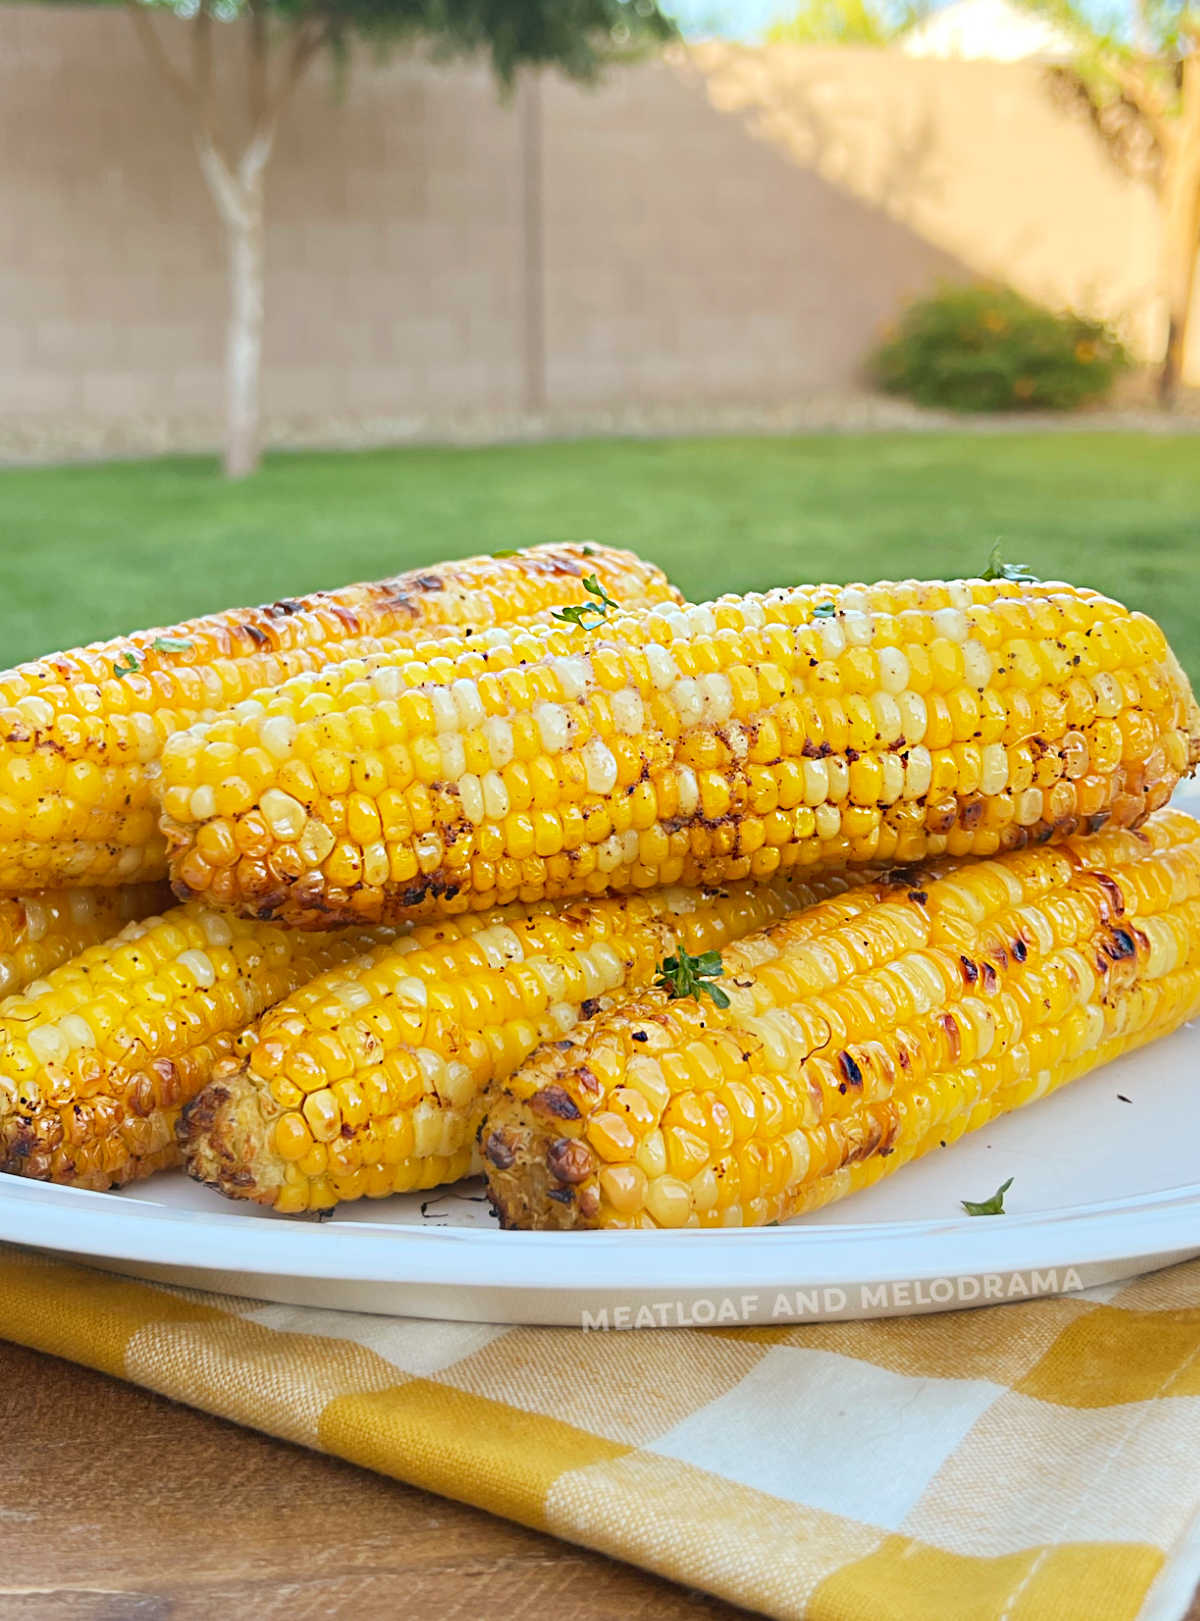 grilled corn on the cob in foil on platter outside by grill